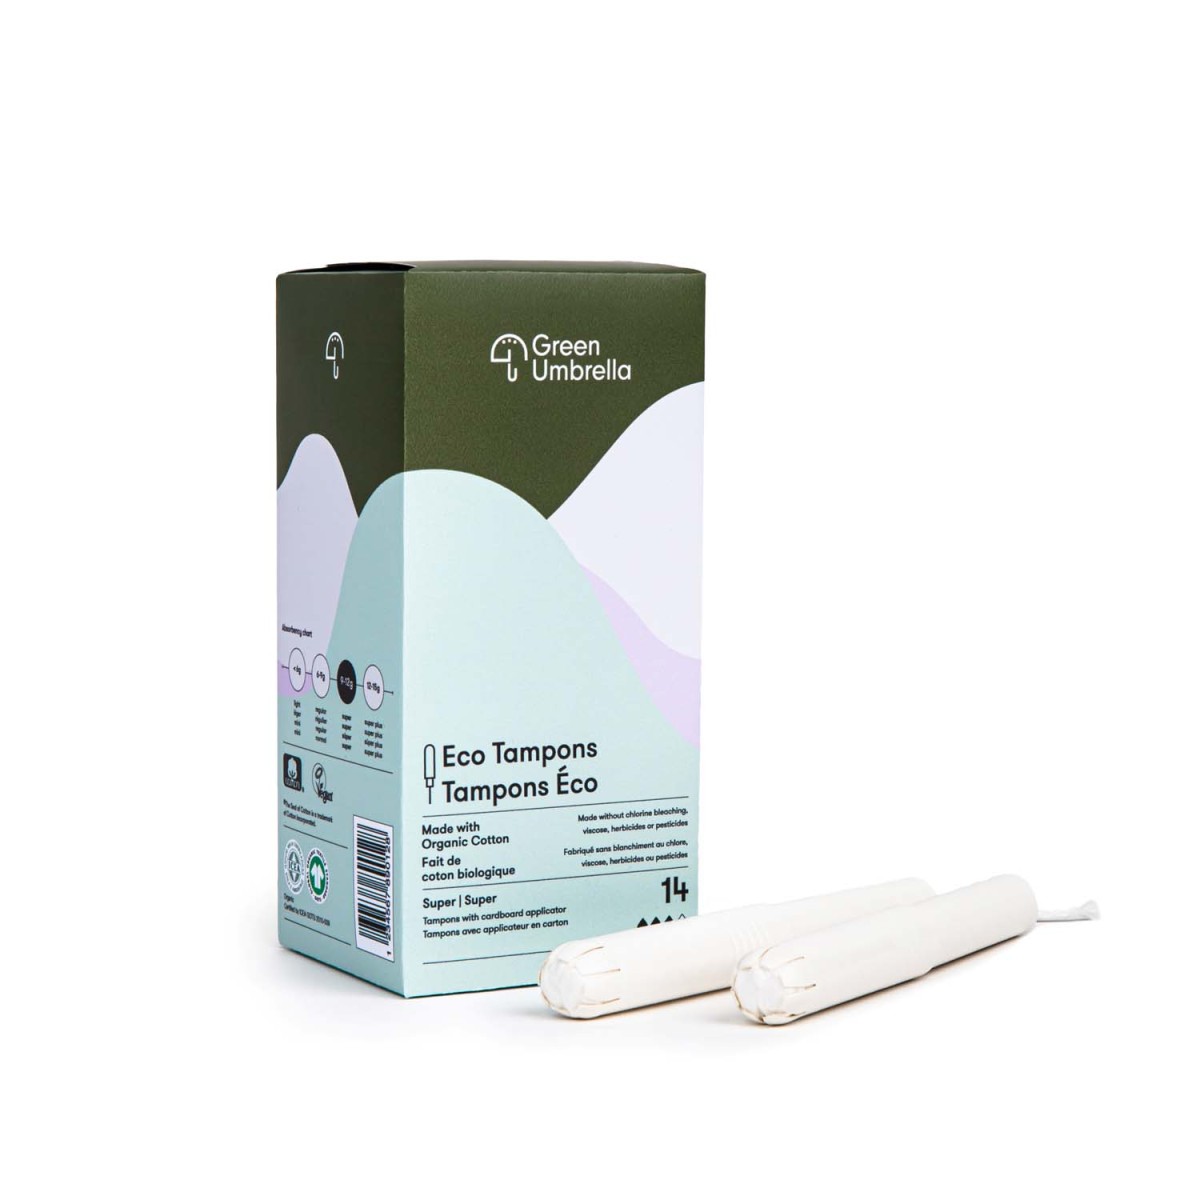 Tampons with applicator. Organic cotton (Super)